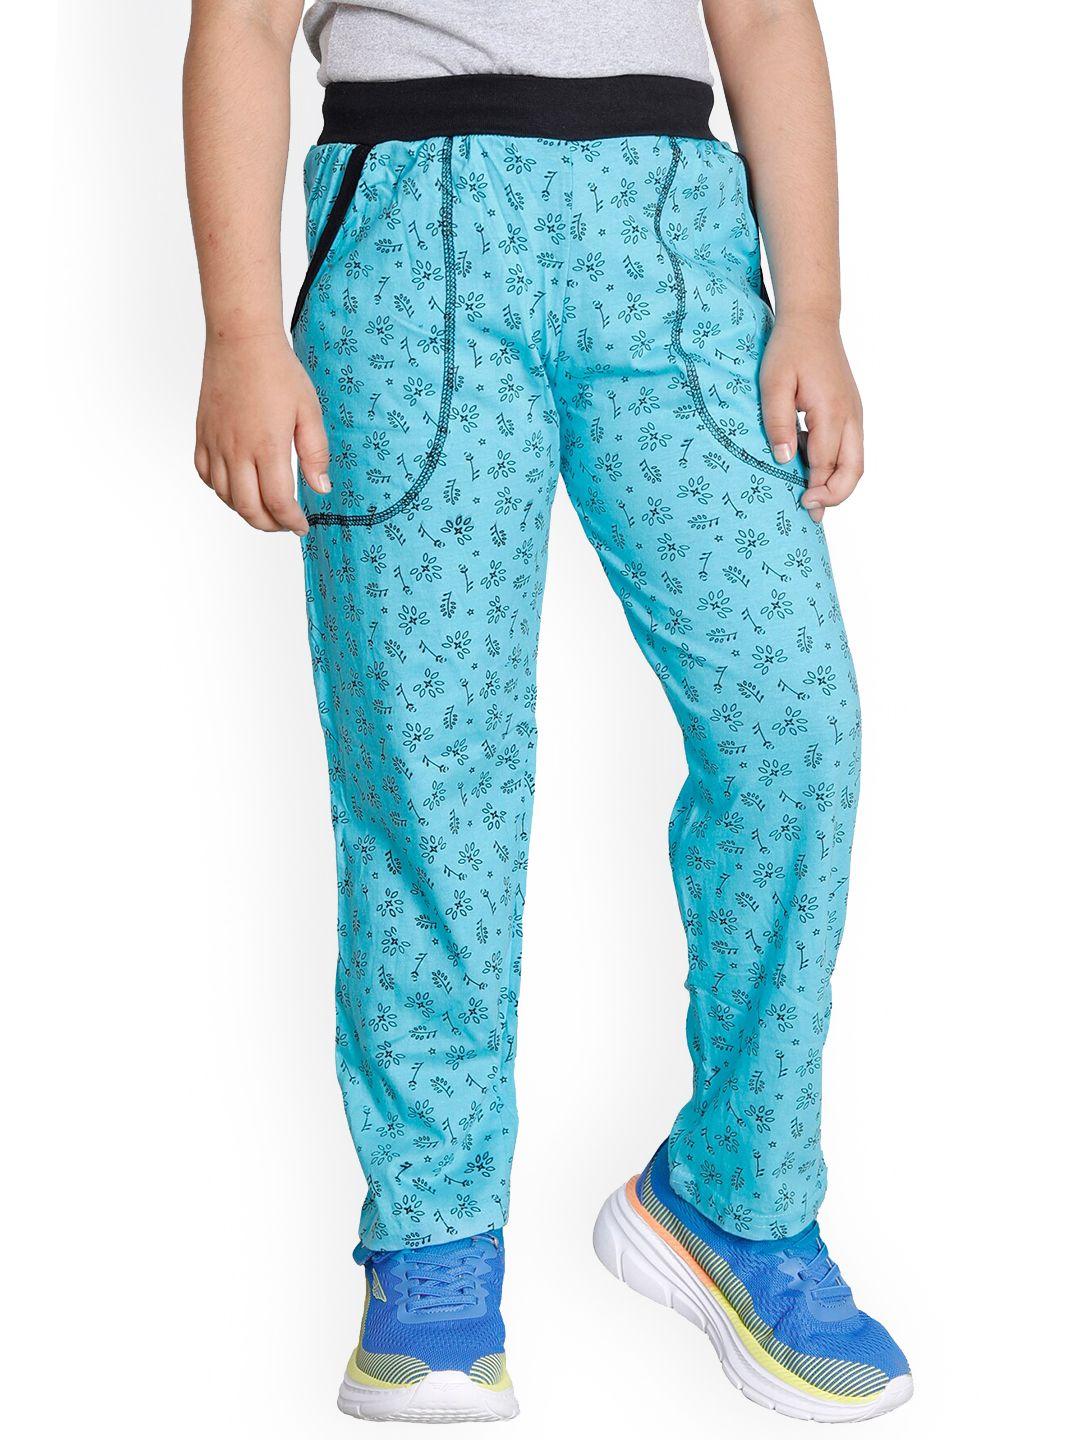 indiweaves-boys-floral-printed-cotton-track-pants